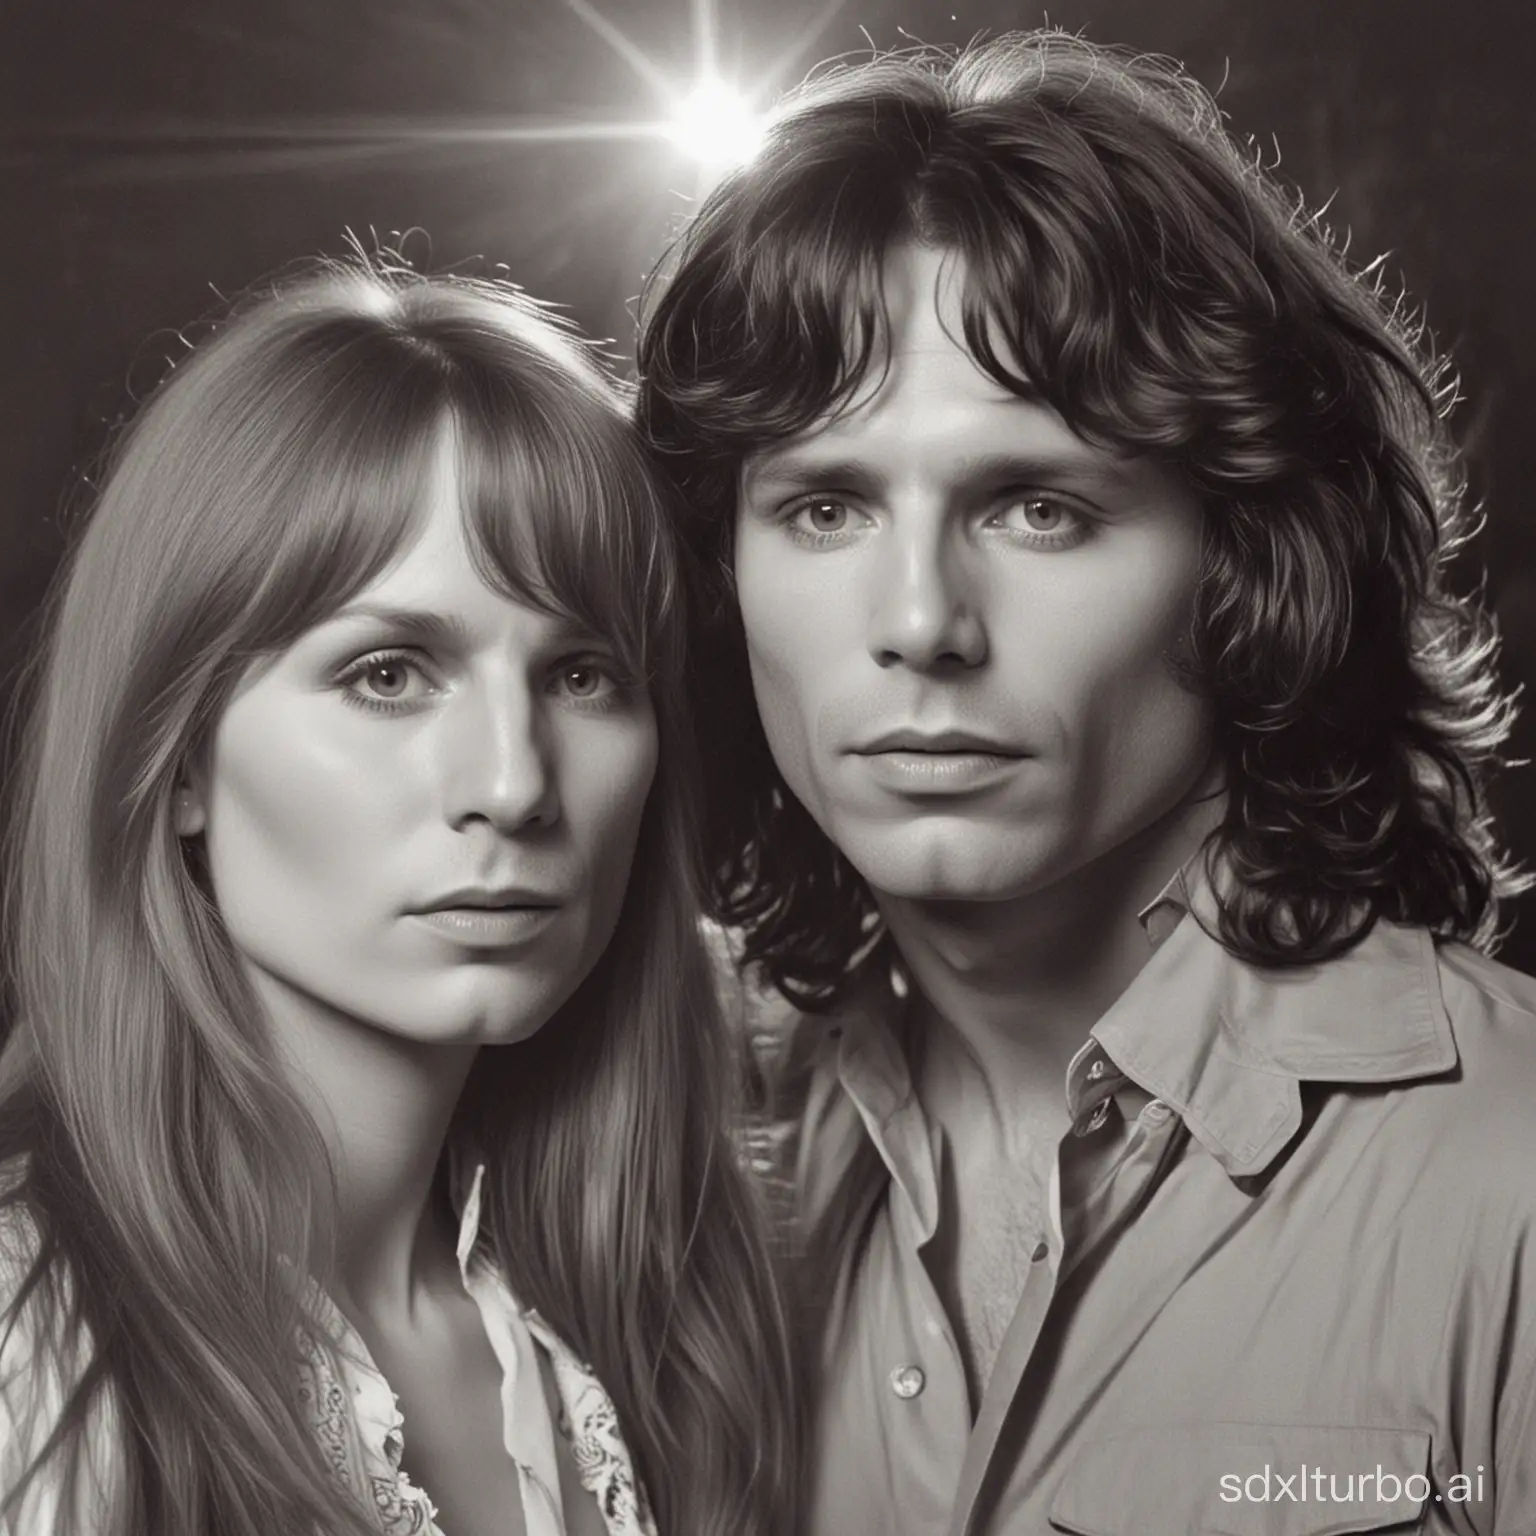 Jim-Morrison-and-Pamela-Courson-Exploring-the-Astral-Plane-with-LSD-and-DMT